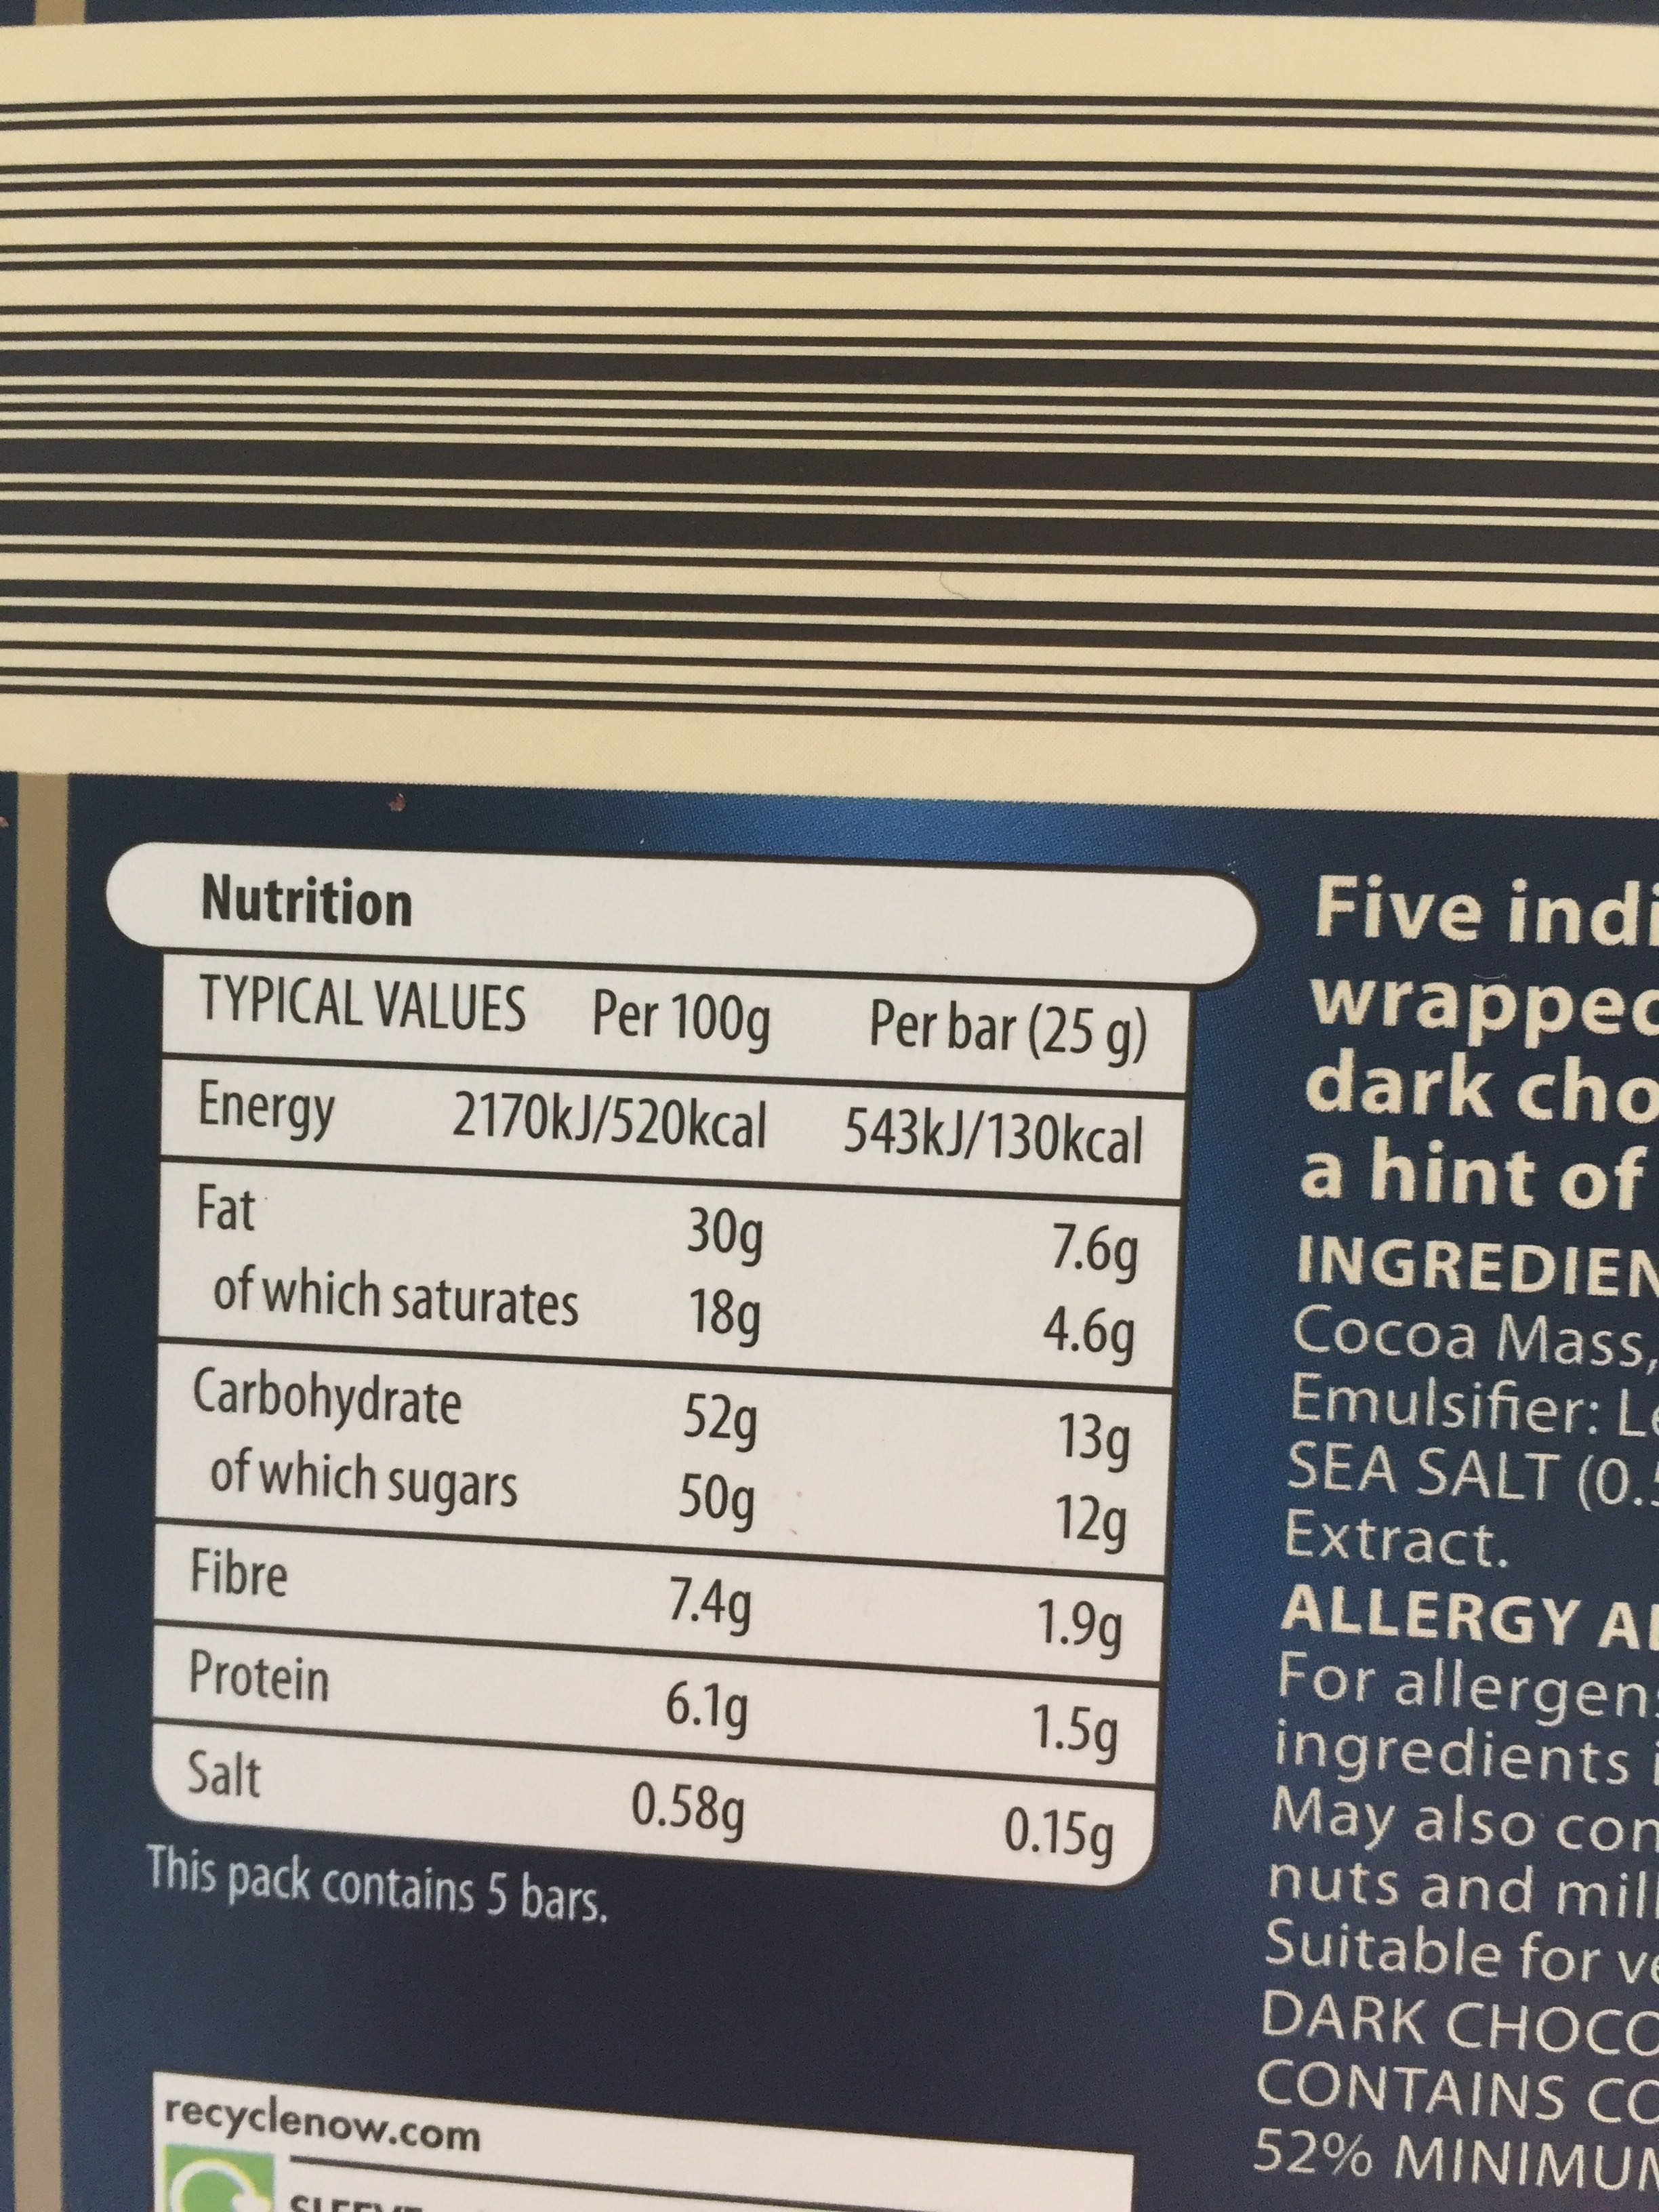 Private chocolatiers - Nutrition facts